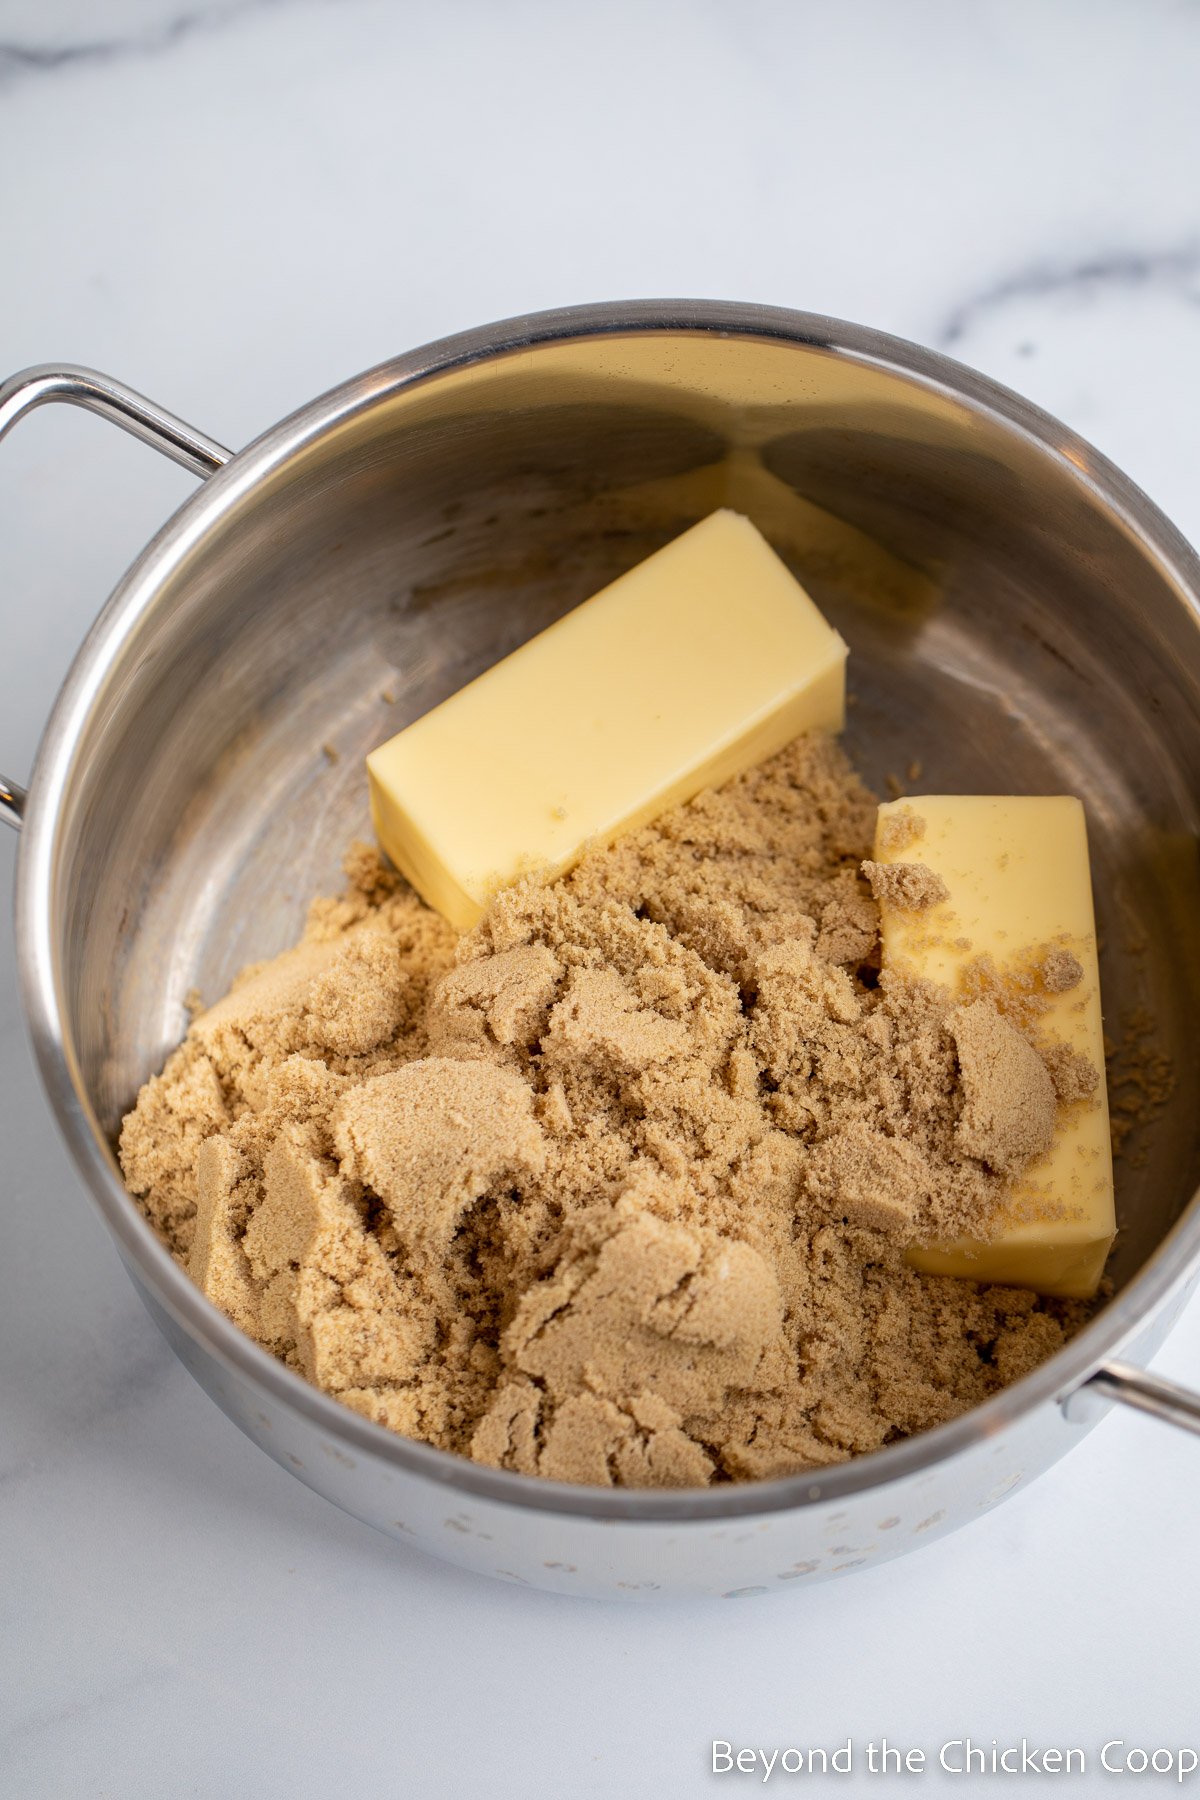 Butter and brown sugar in a saucepan.